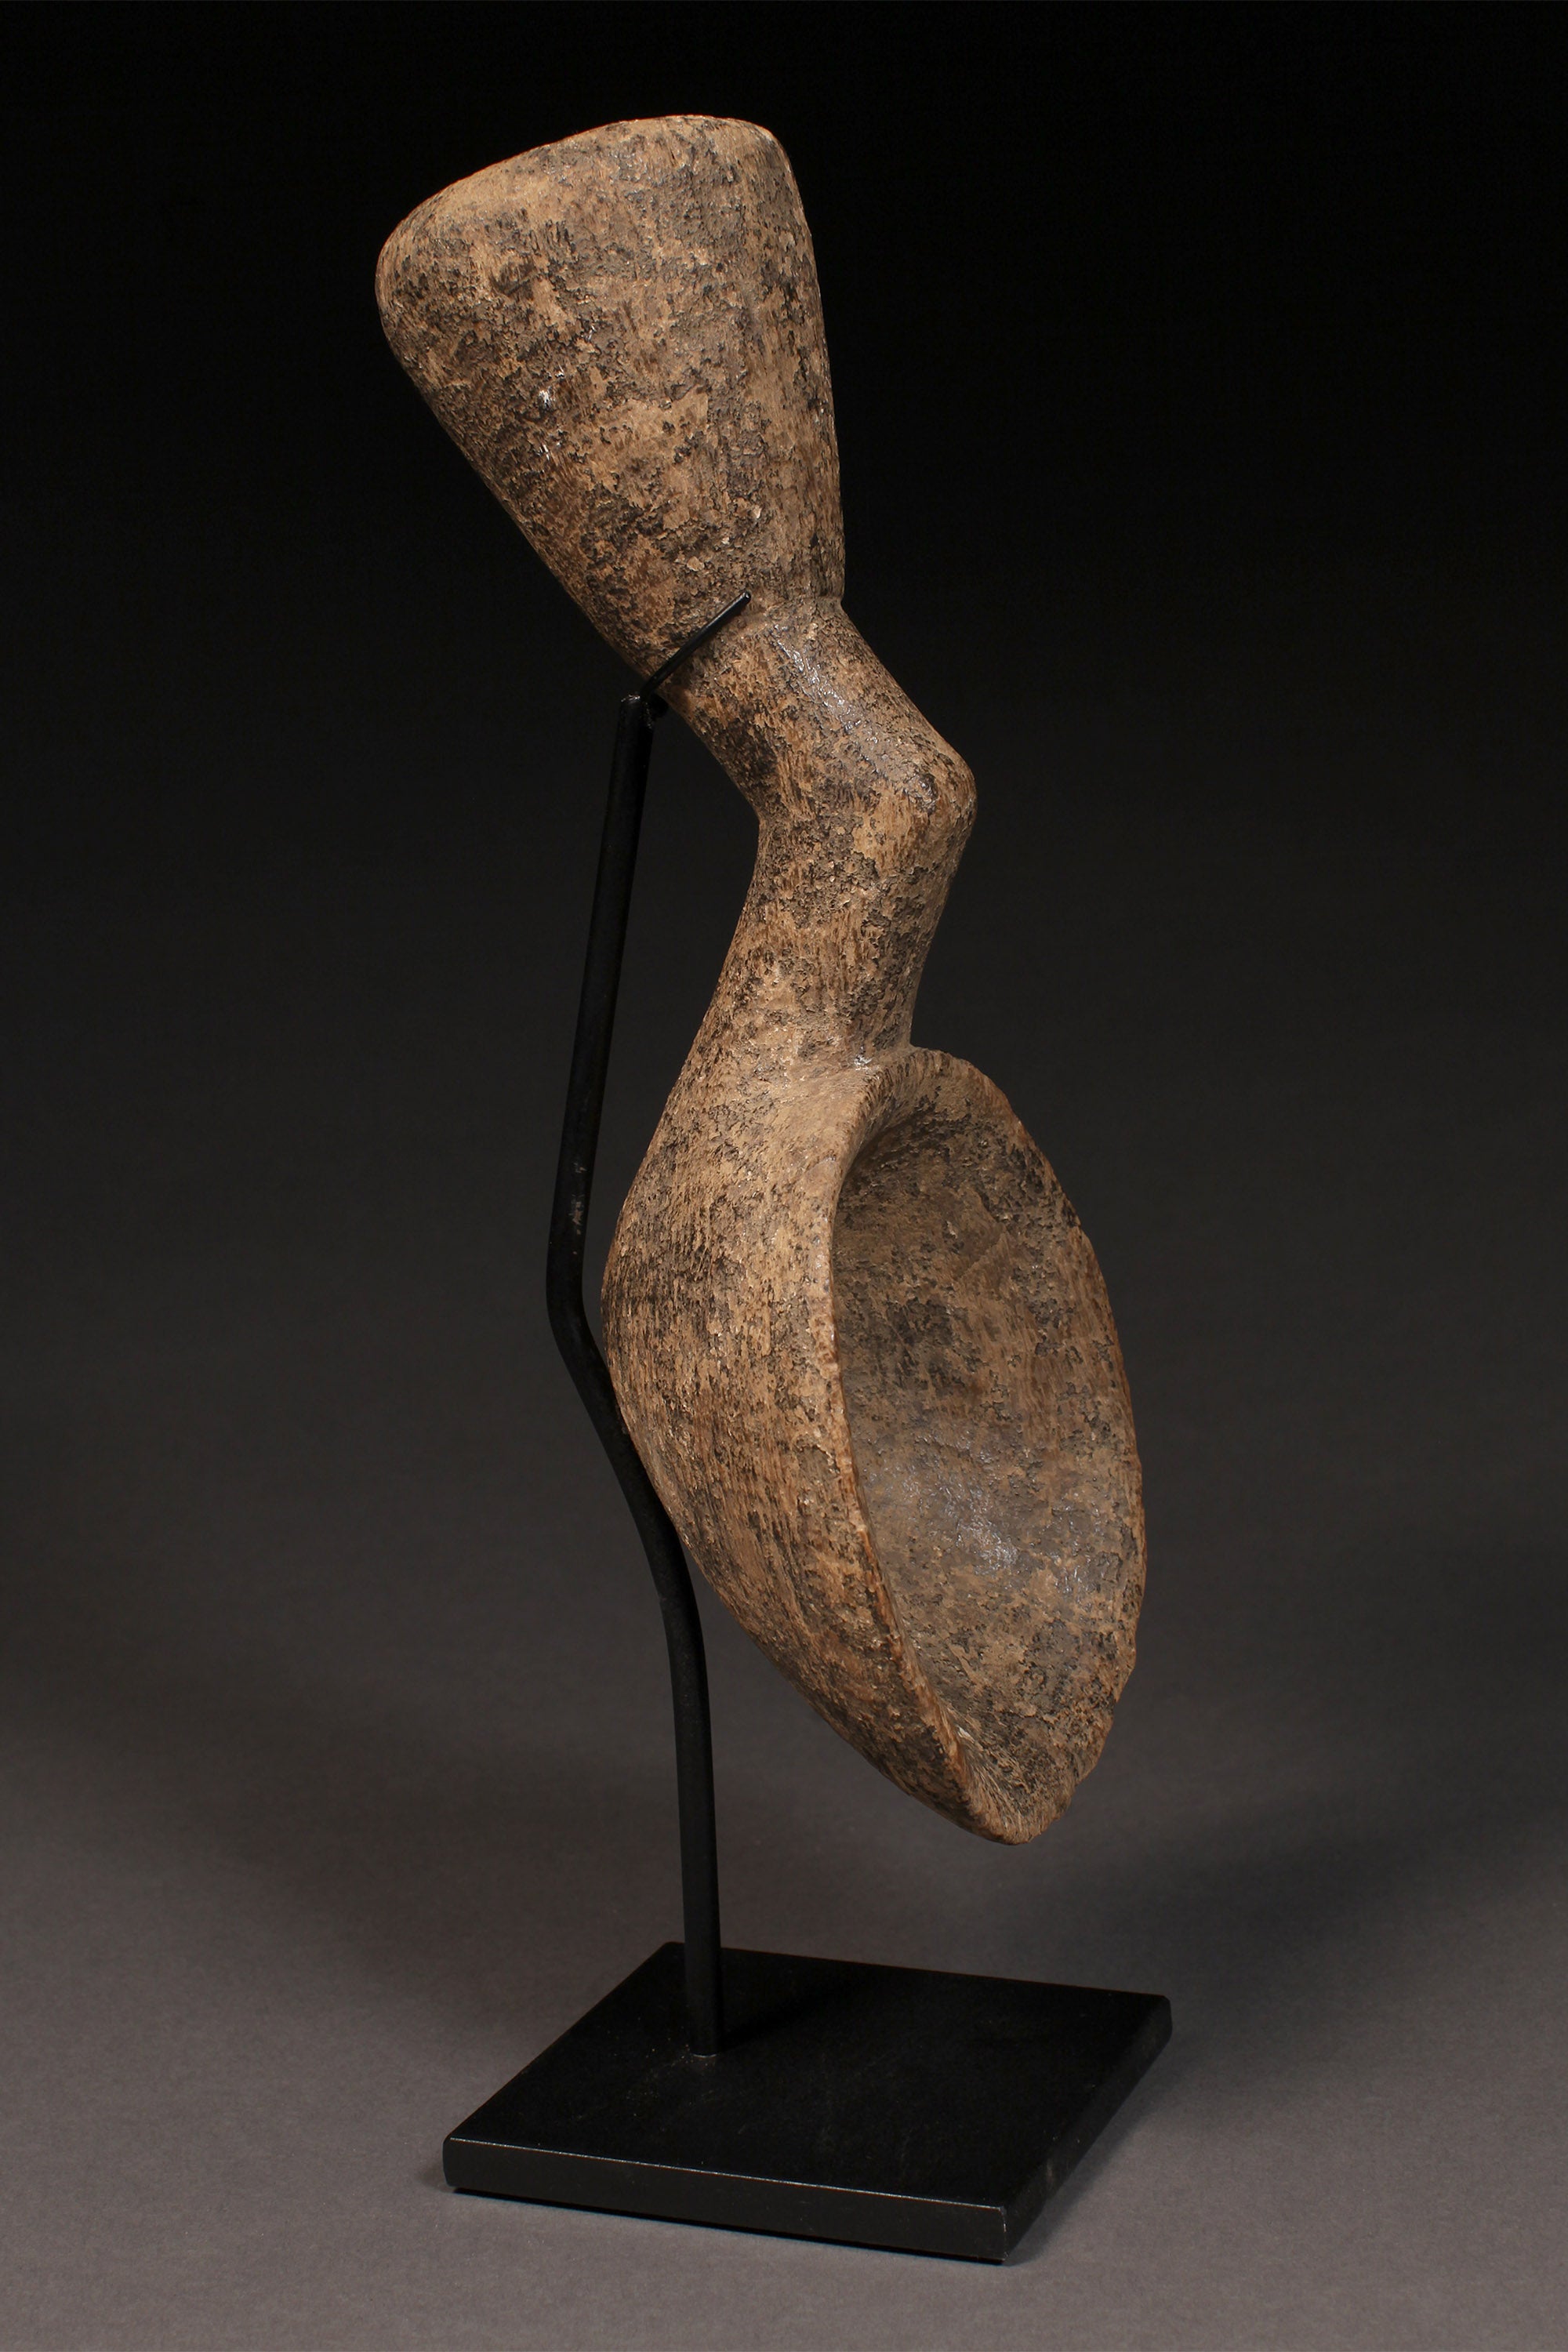 Tribal Objects - This one-of-a-kind Geometric Ceremonial Ladle Spoon is caved from wood by the Kulango Tribe of the Ivory Coast. This unique piece is perfect for bringing an authentic, traditional touch to any home. It can be used as a collectible, decorative object, or even a sculpture. H: 11.5” (13.5